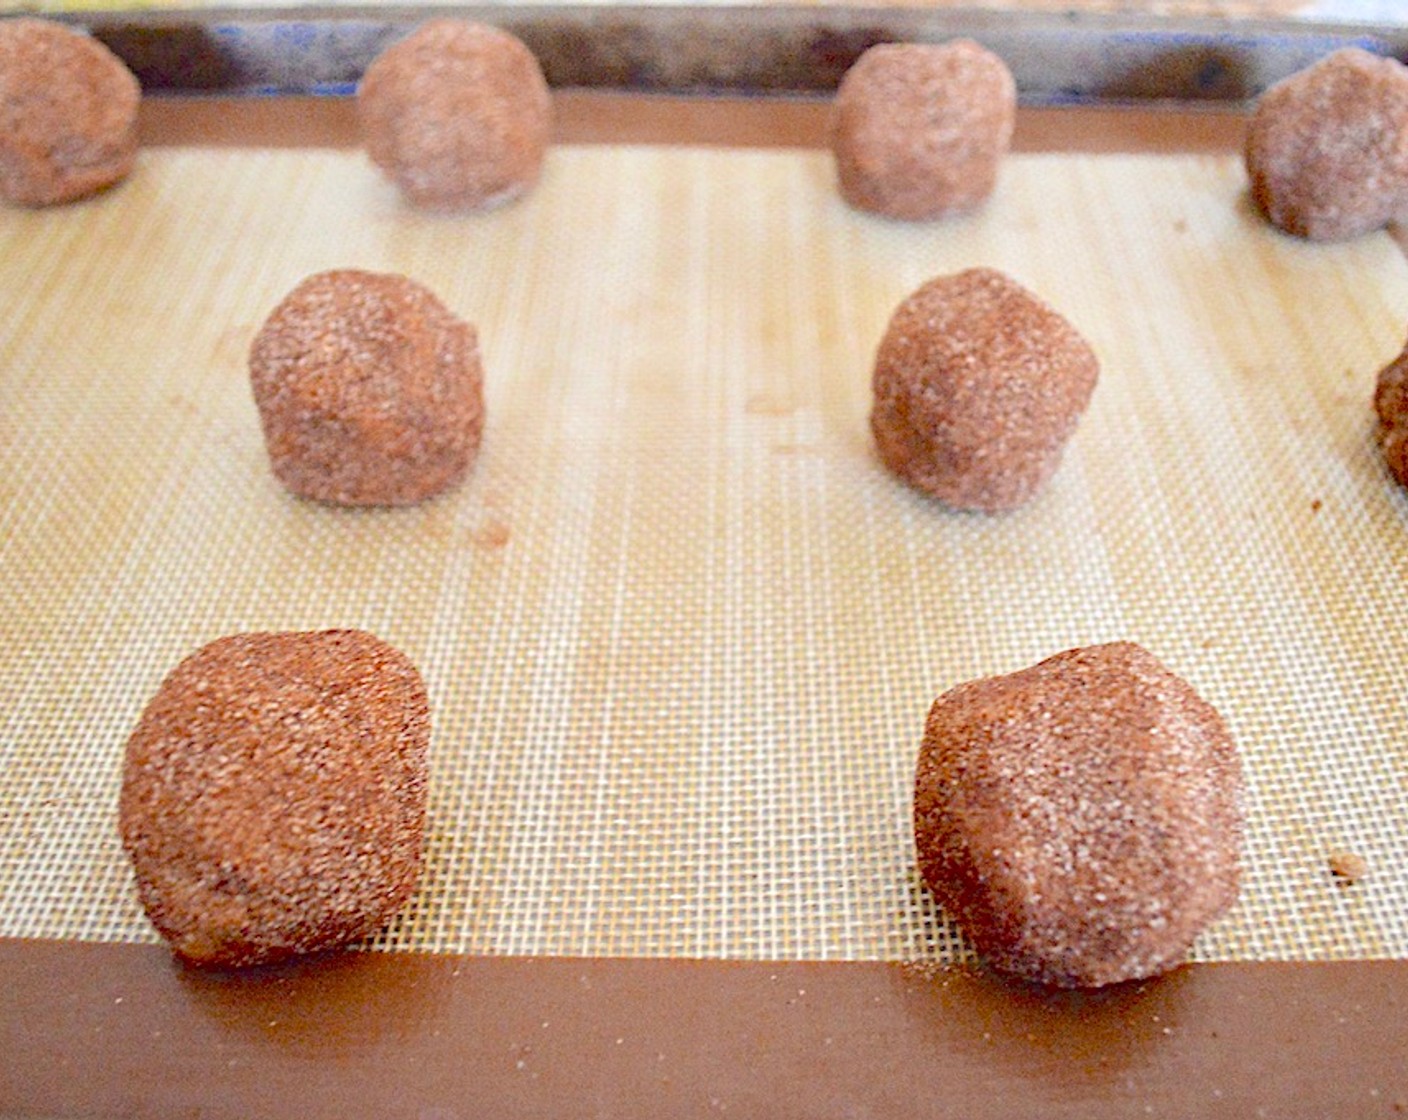 step 9 Bring the sides over to completely enrobe the caramel and roll it slightly to smooth it back into a ball. Roll it through the cinnamon sugar to coat it well and place it on the lined sheet tray. Repeat this process to make a dozen total. Put the tray in the freezer to set everything for 20 minutes.